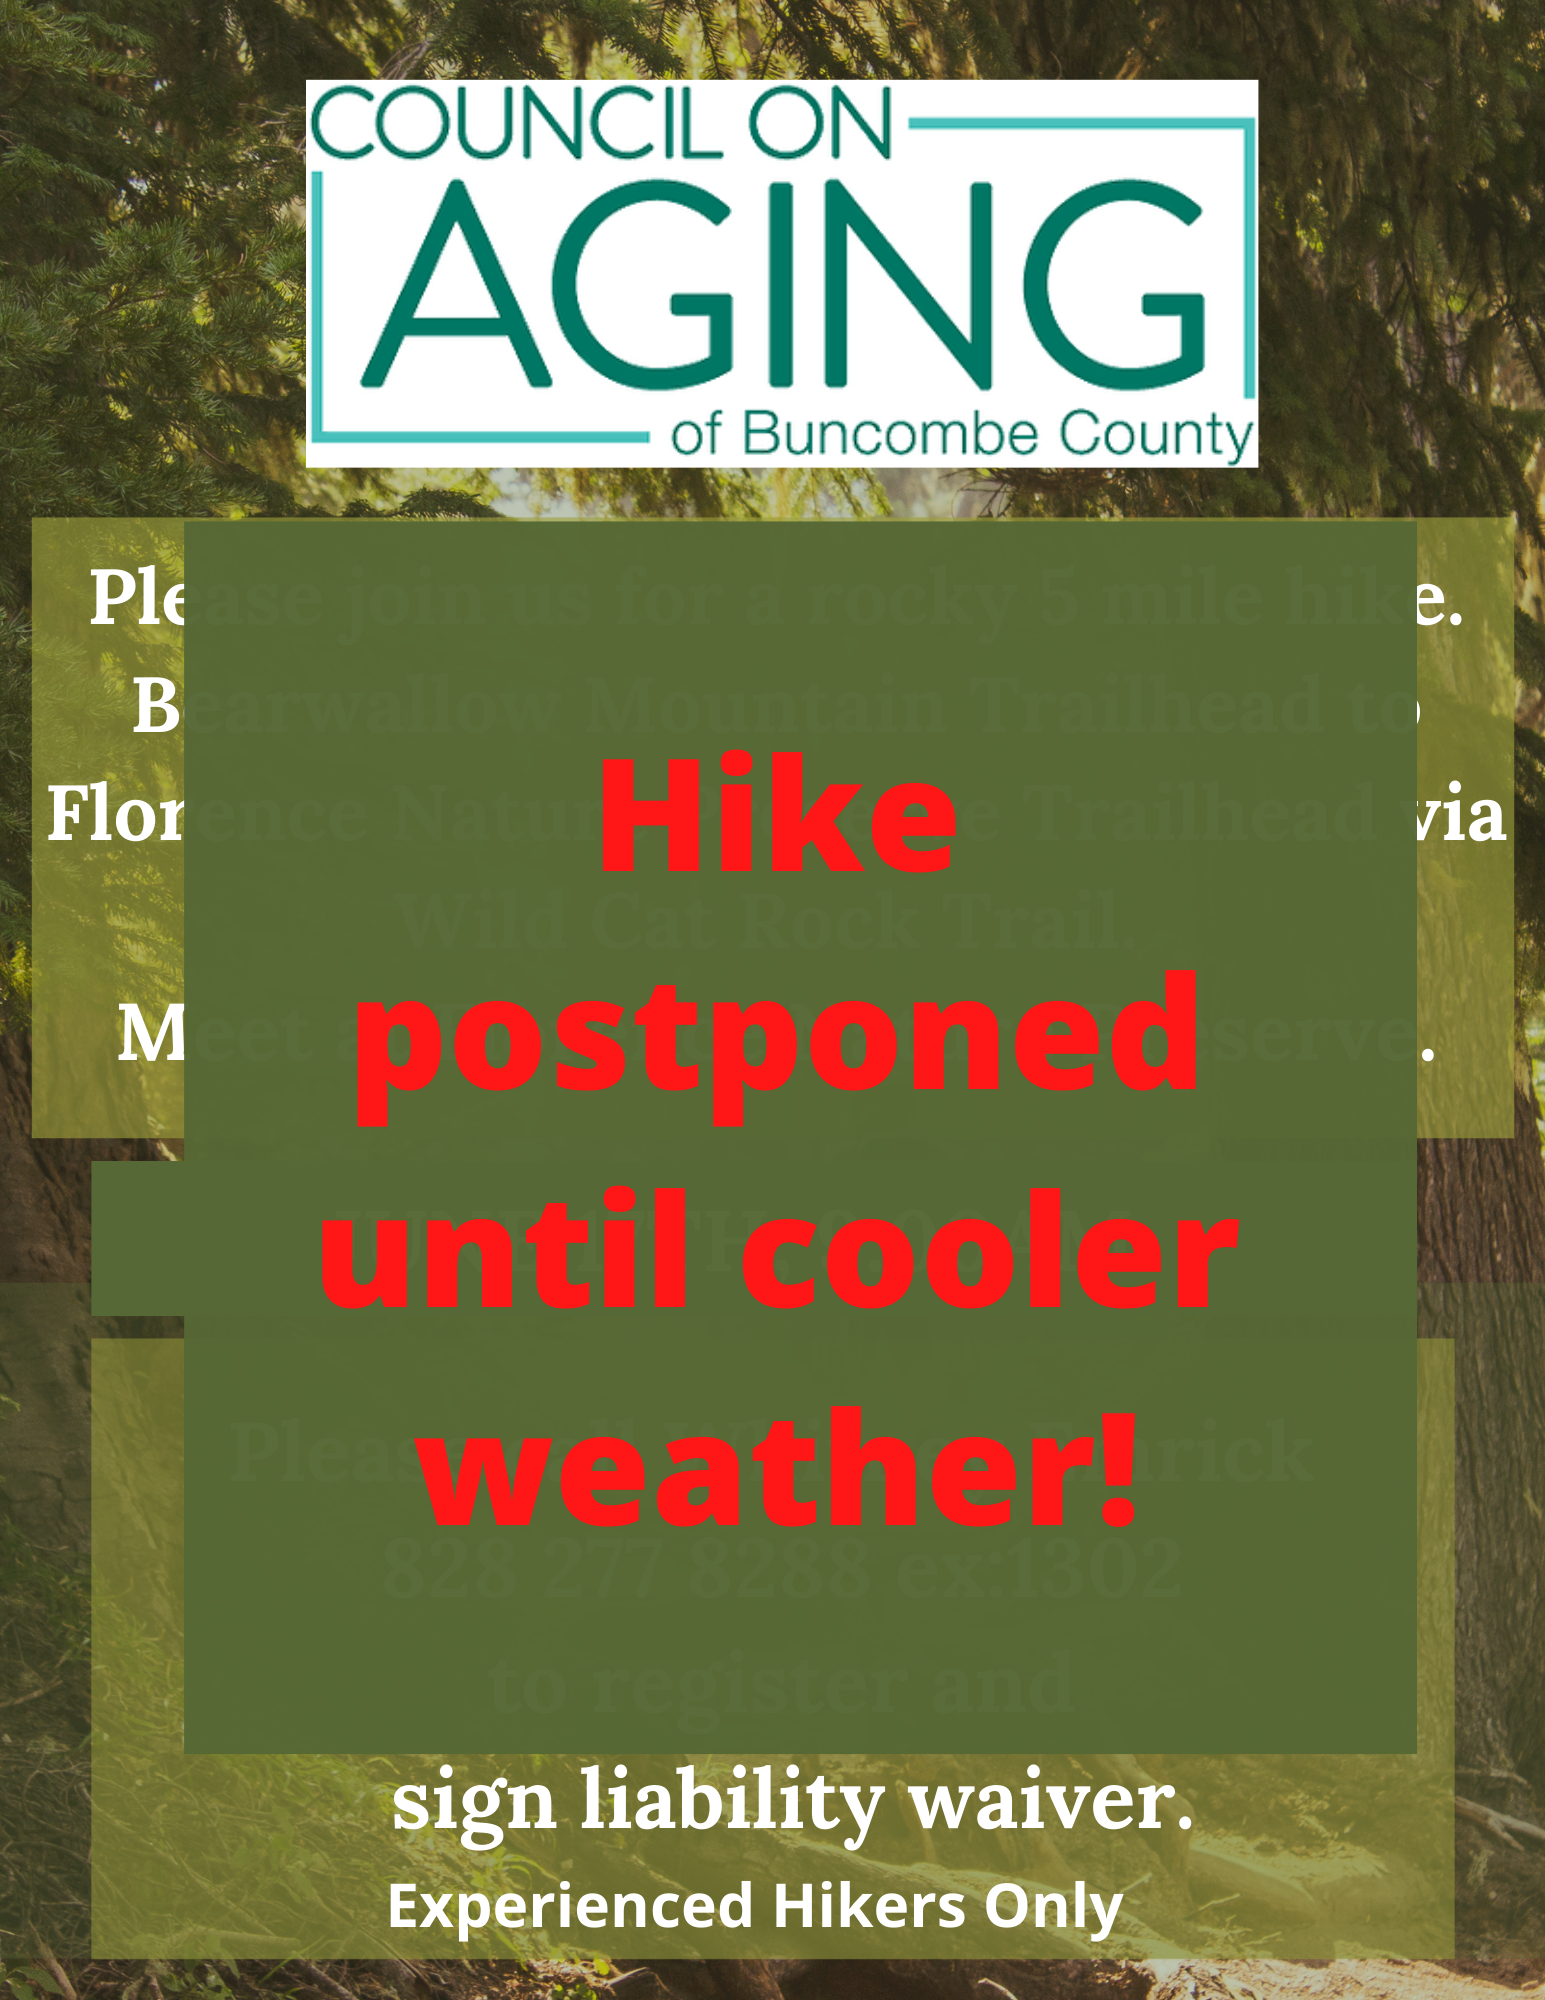 COUNCIL ON AGING - 5 MILE HIKE - postponed